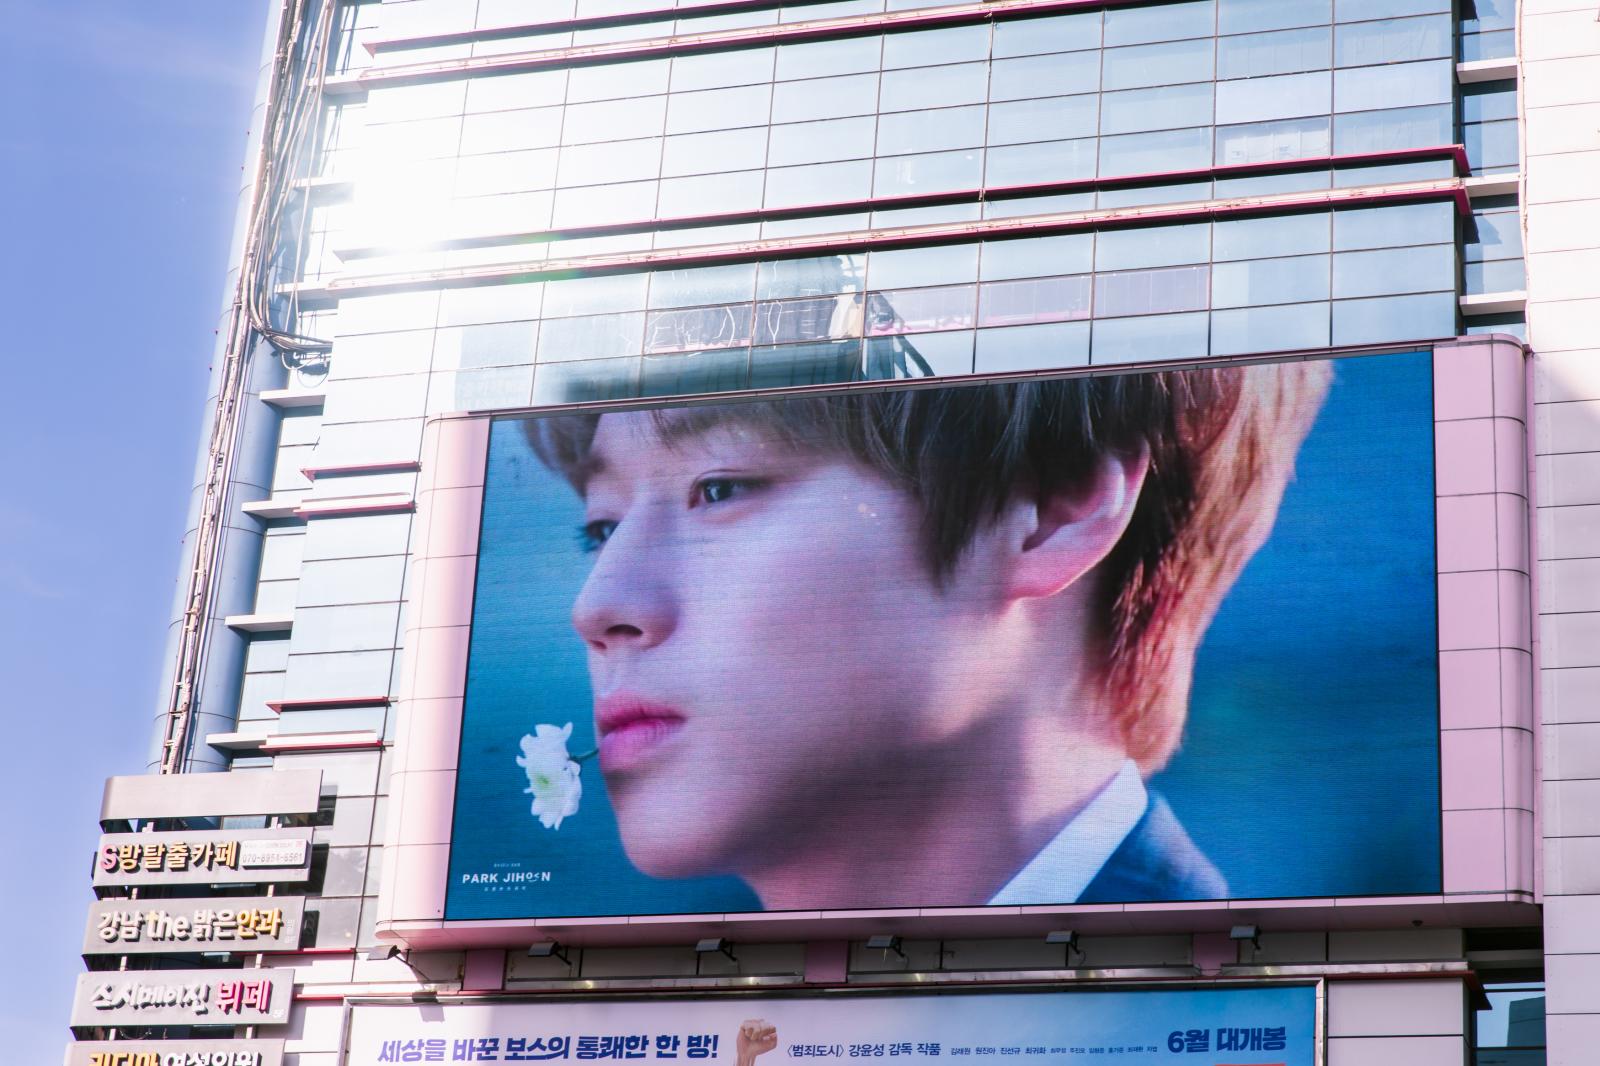 Fans of Jihoon Park from the bo...ent in Times Square each month.